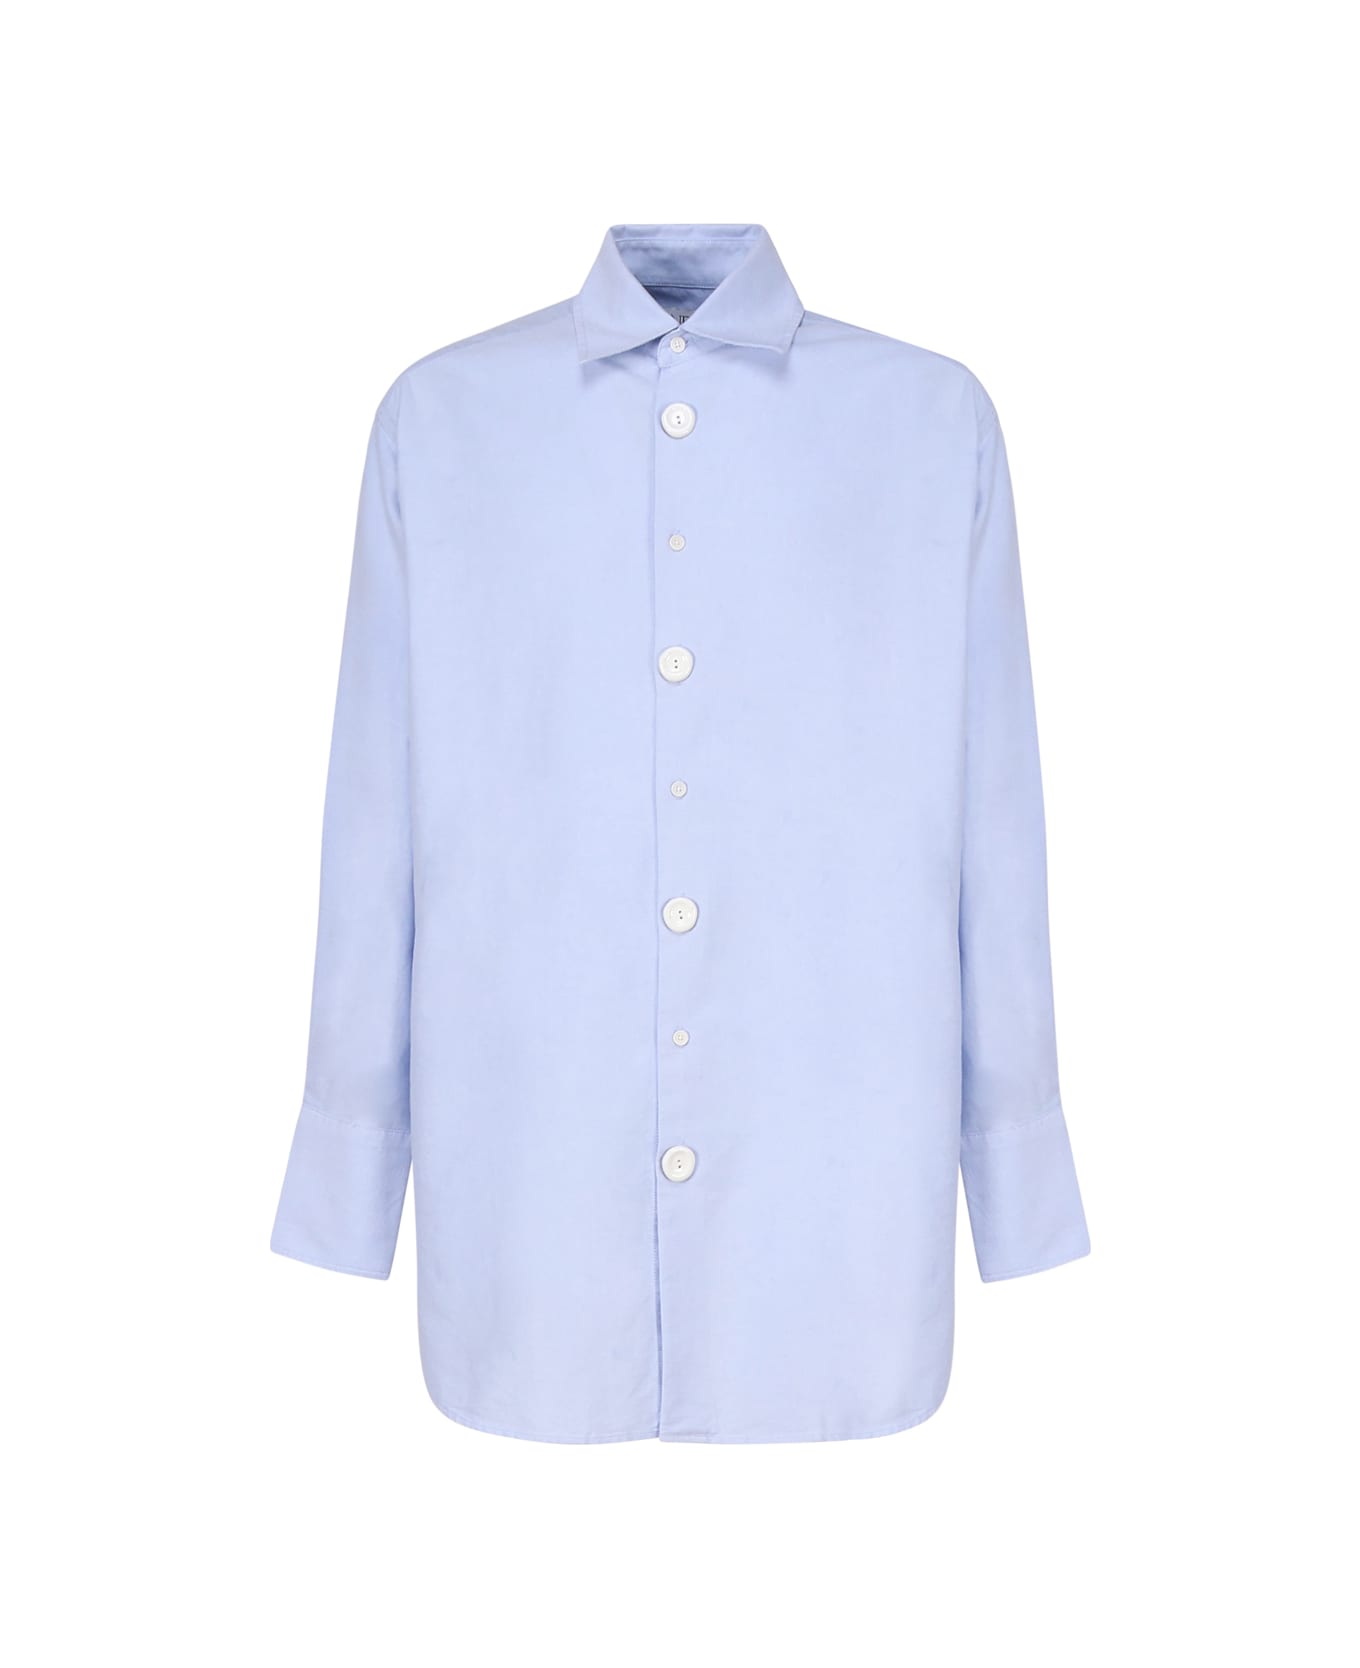 J.W. Anderson Shirt With Anchor Embroidery - Light blue